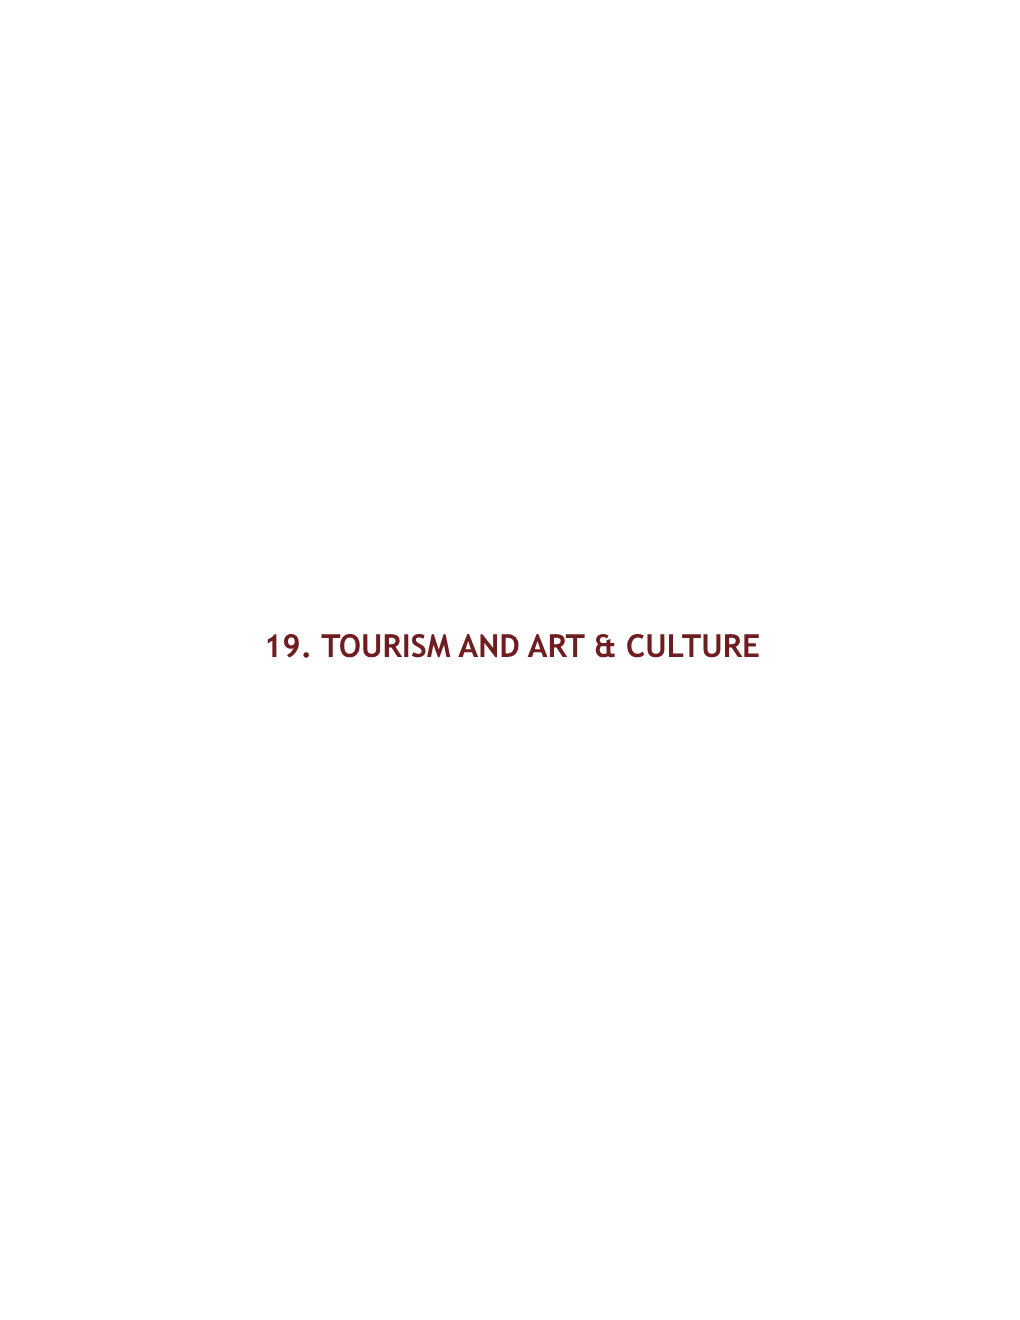 19. Tourism and Art & Culture